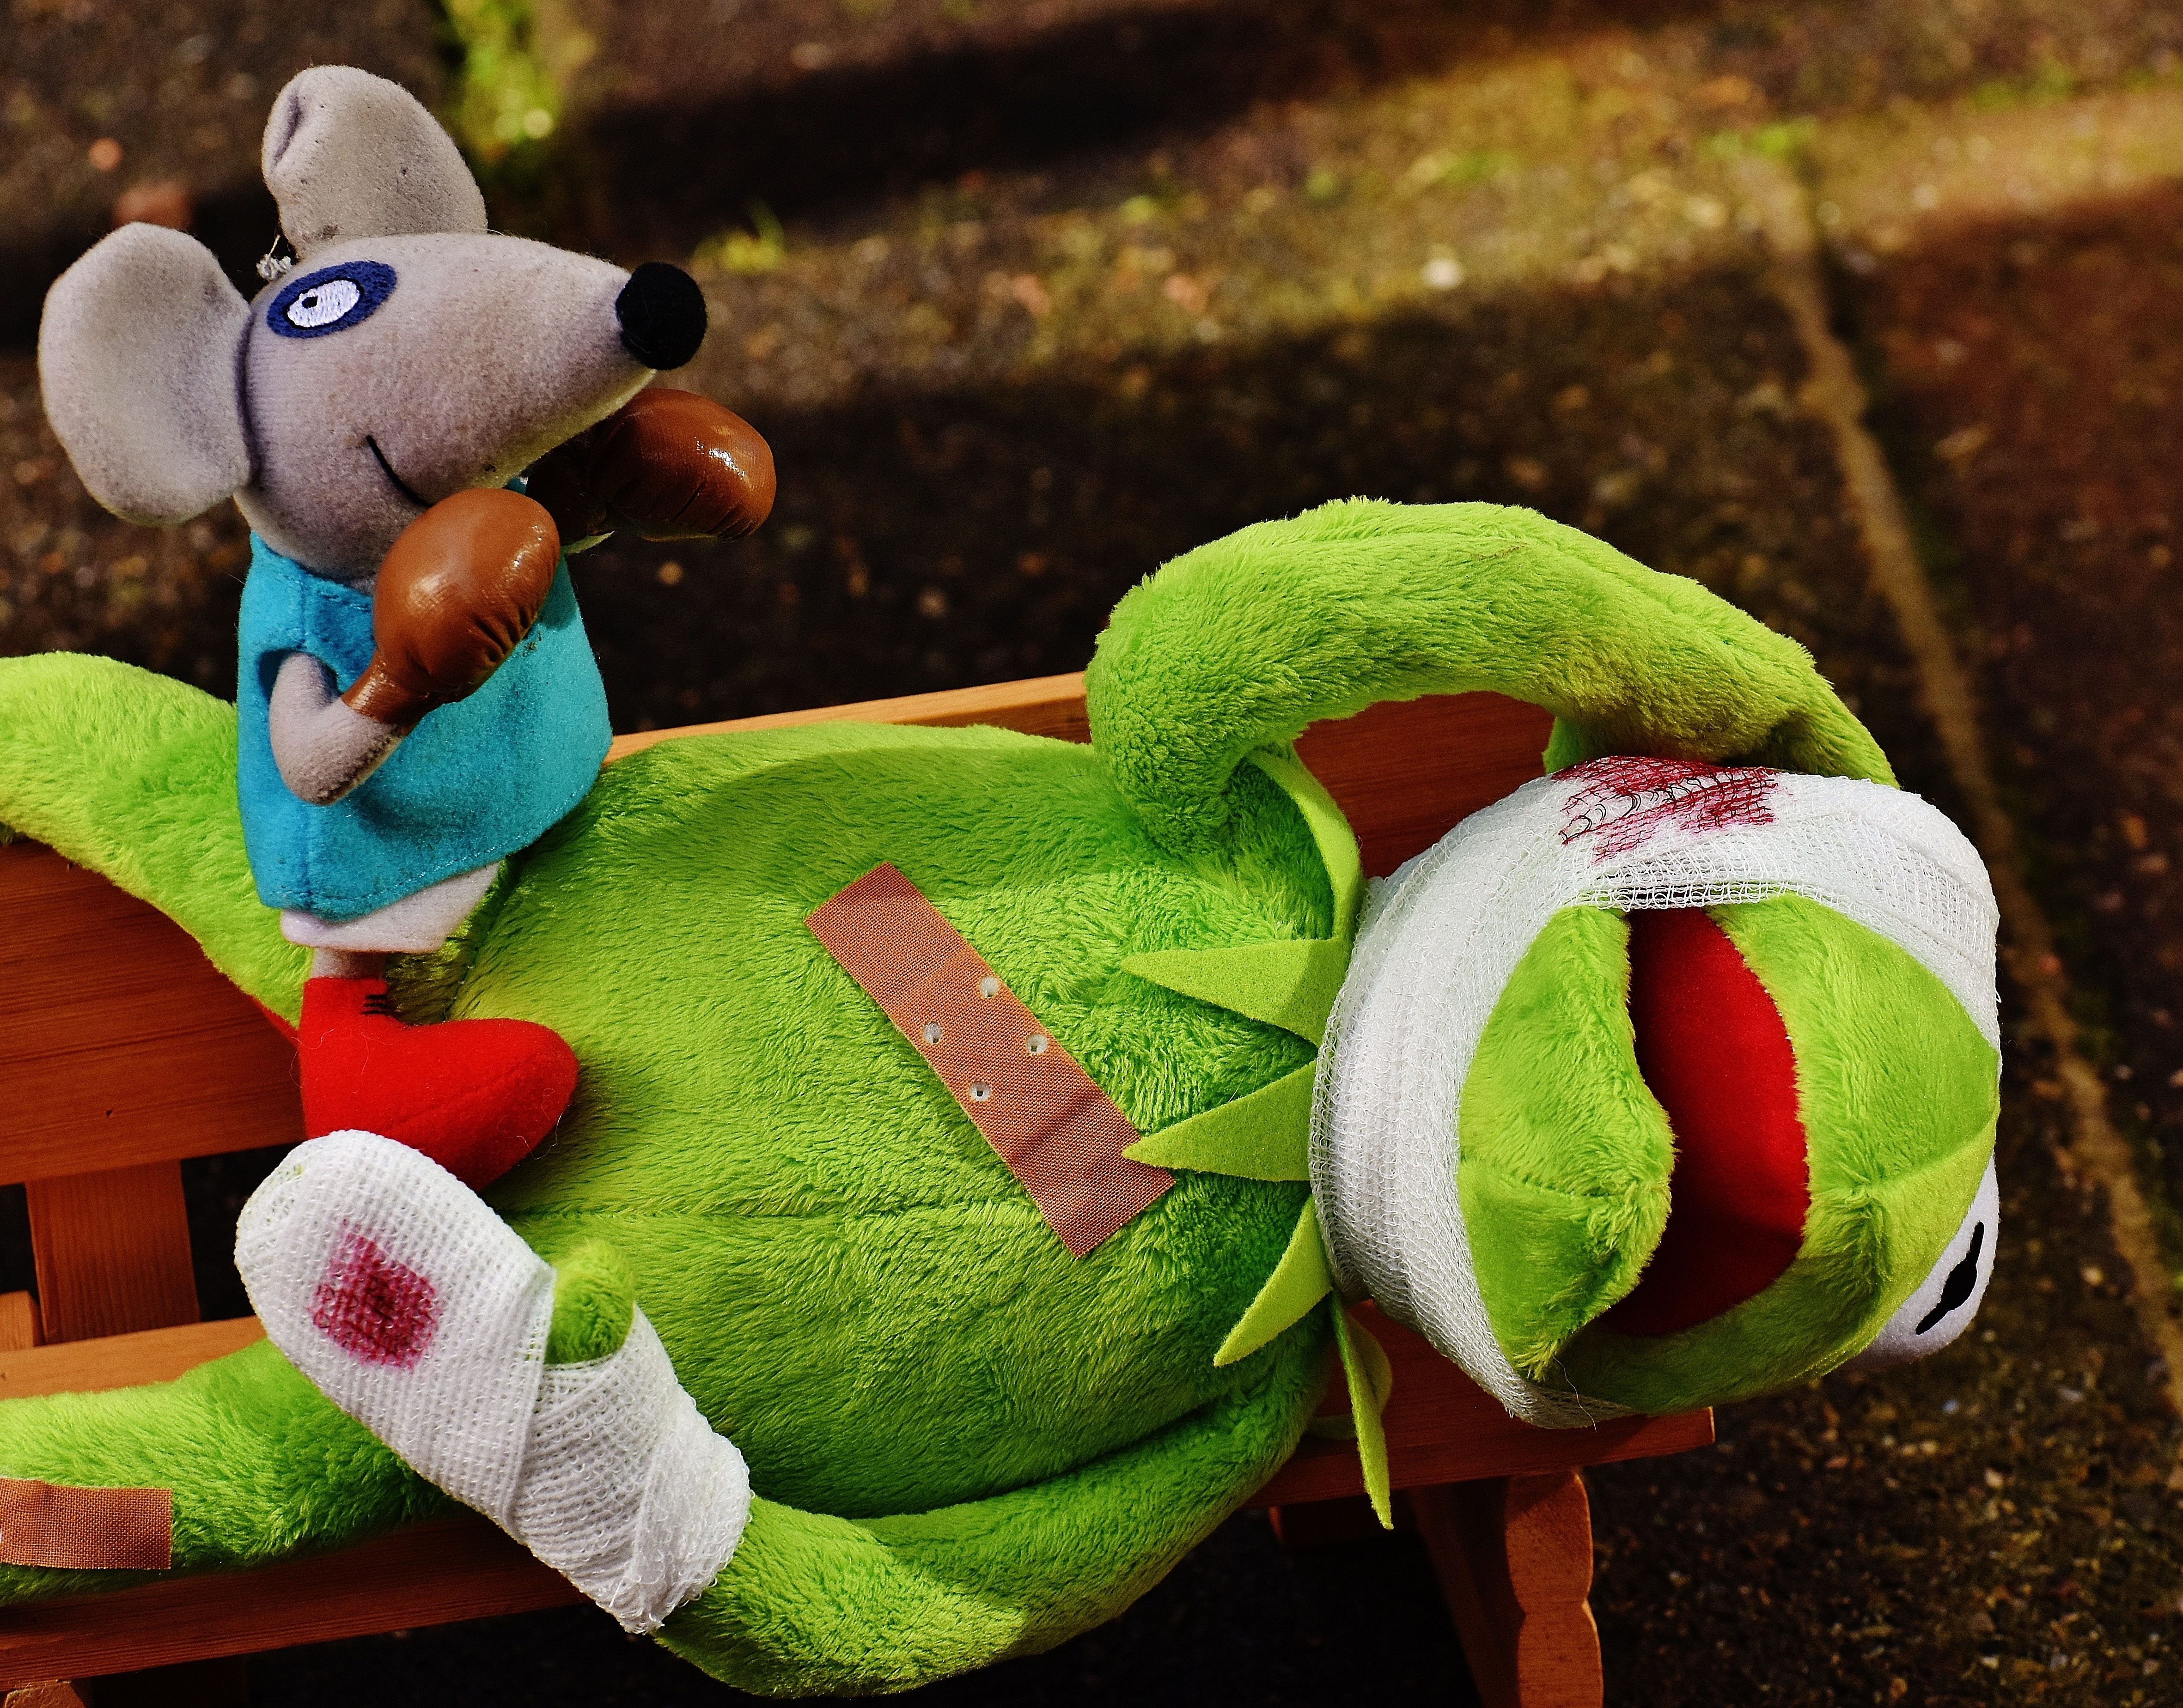 kermit the frog and rat plush toys